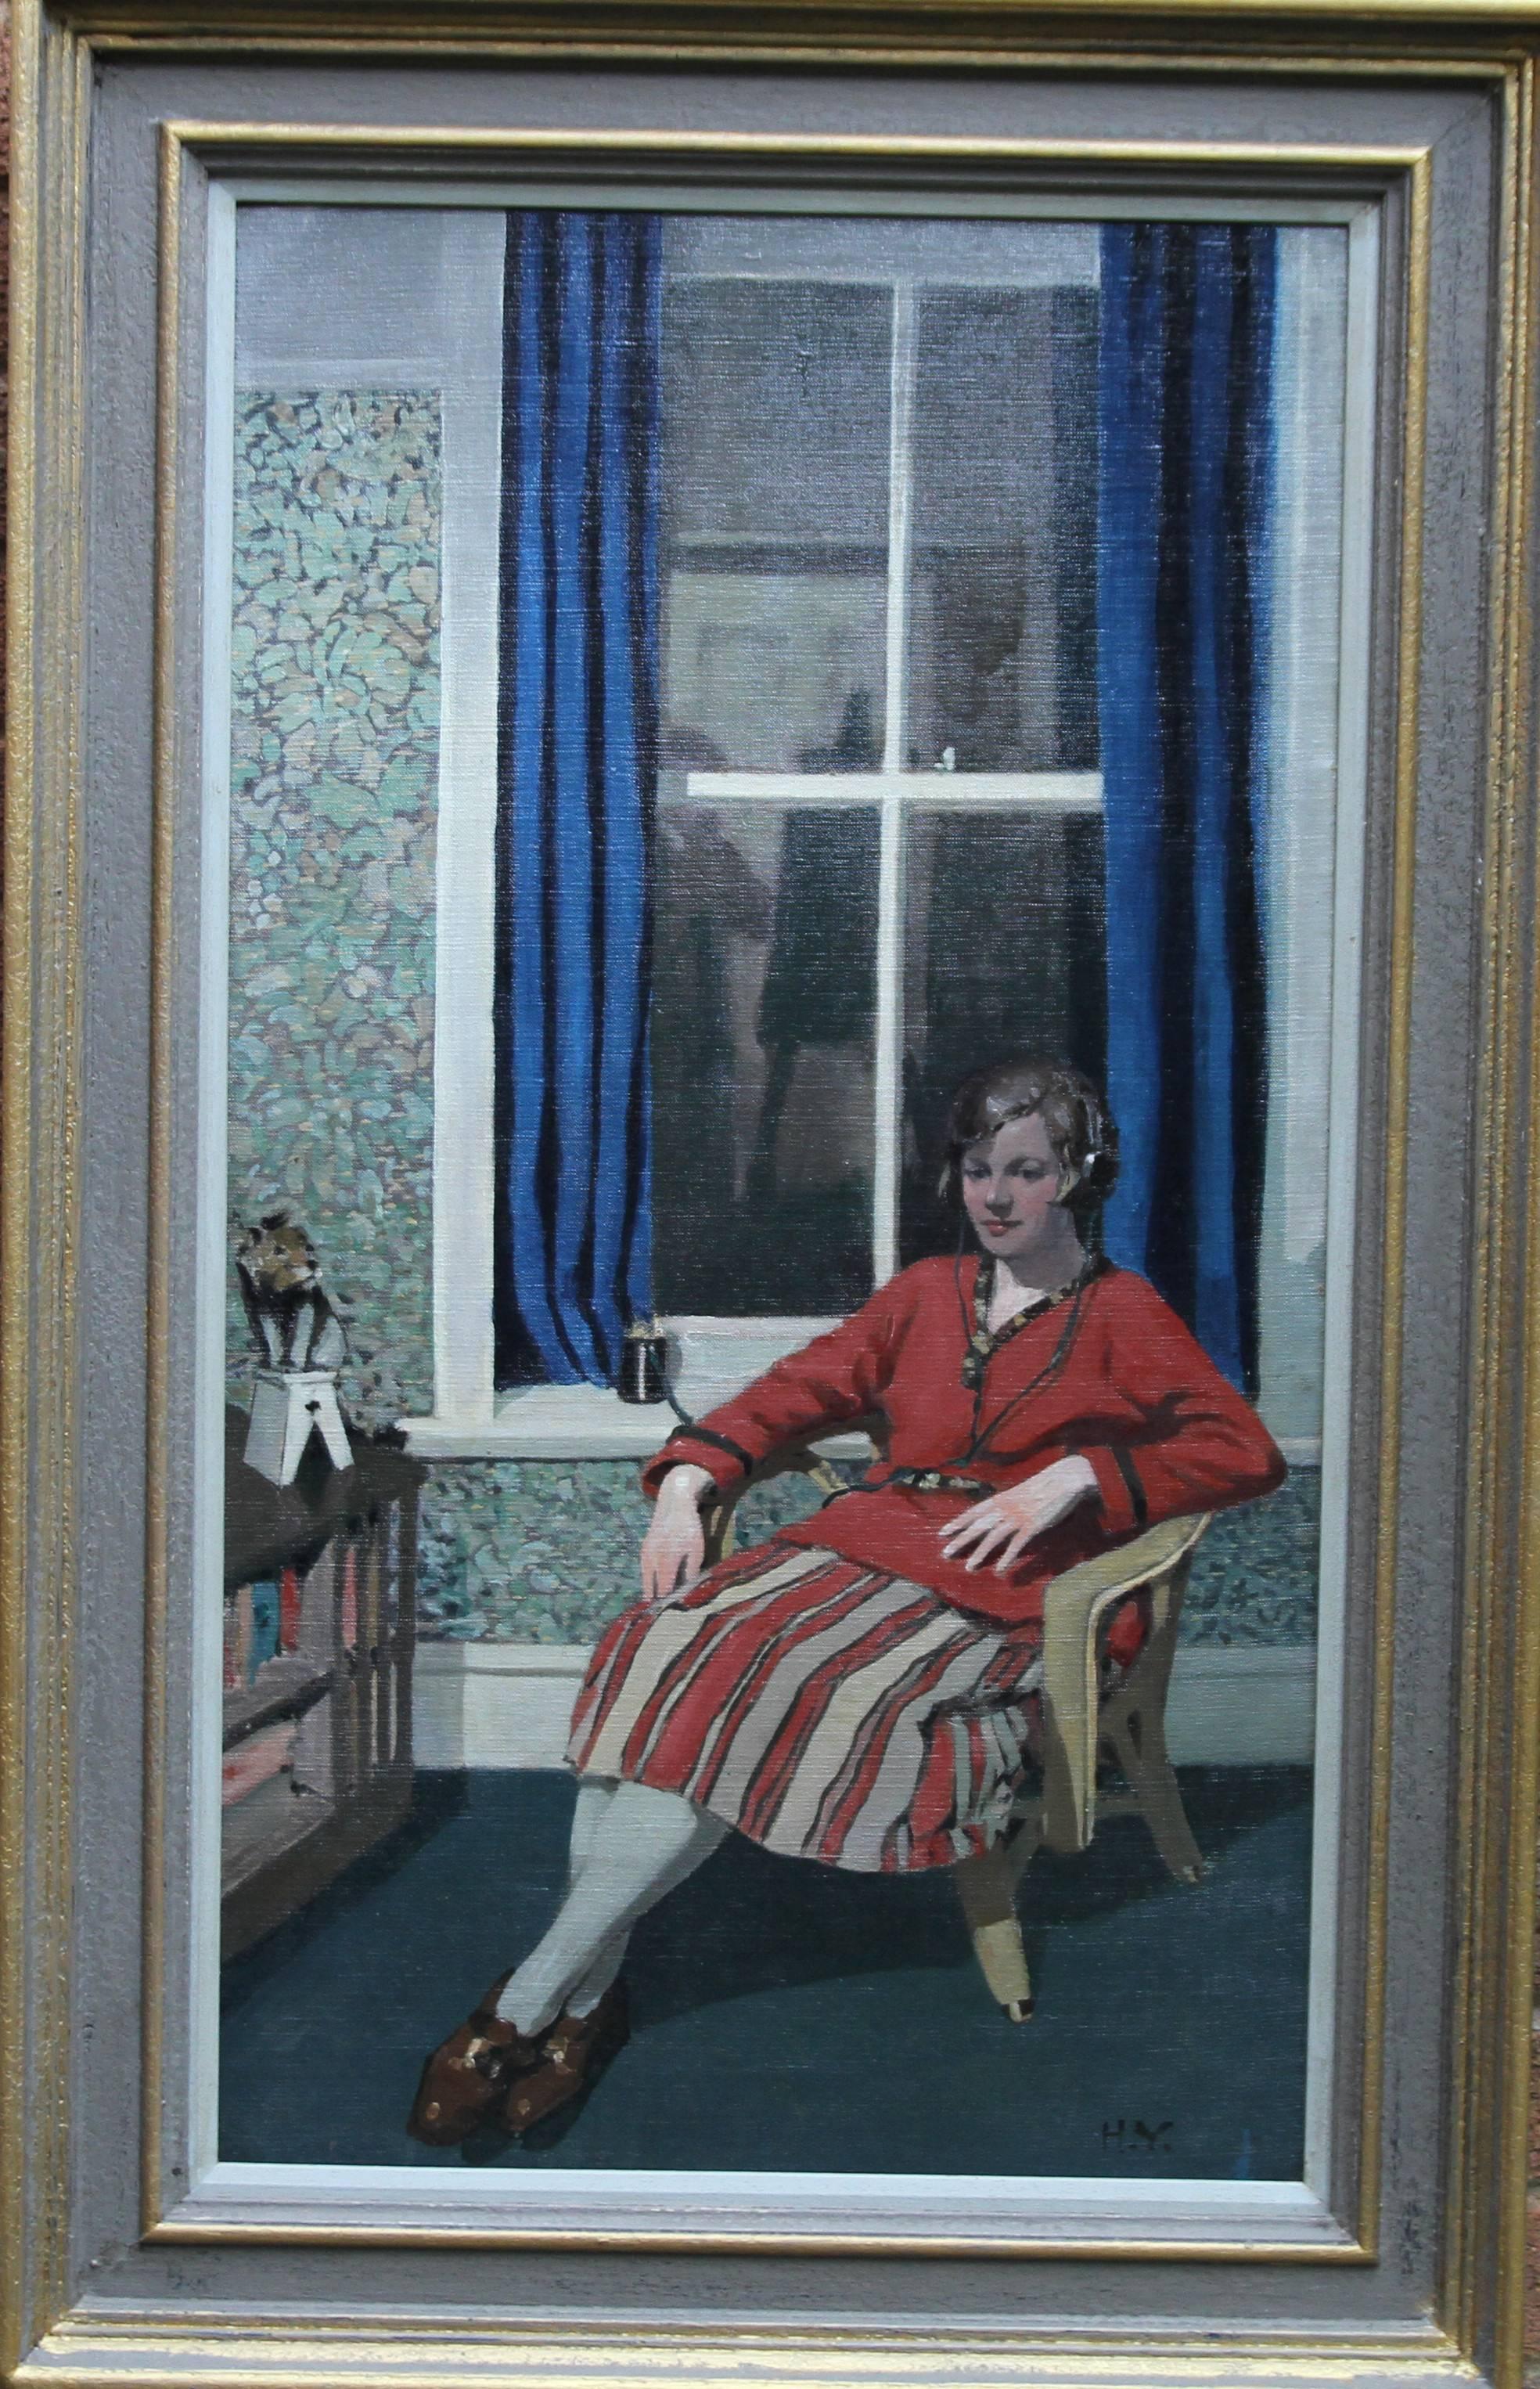 Harry Yearsley Interior Painting - The Blue Curtain - Marion Yearsley seated portrait 1920's interior radio oil